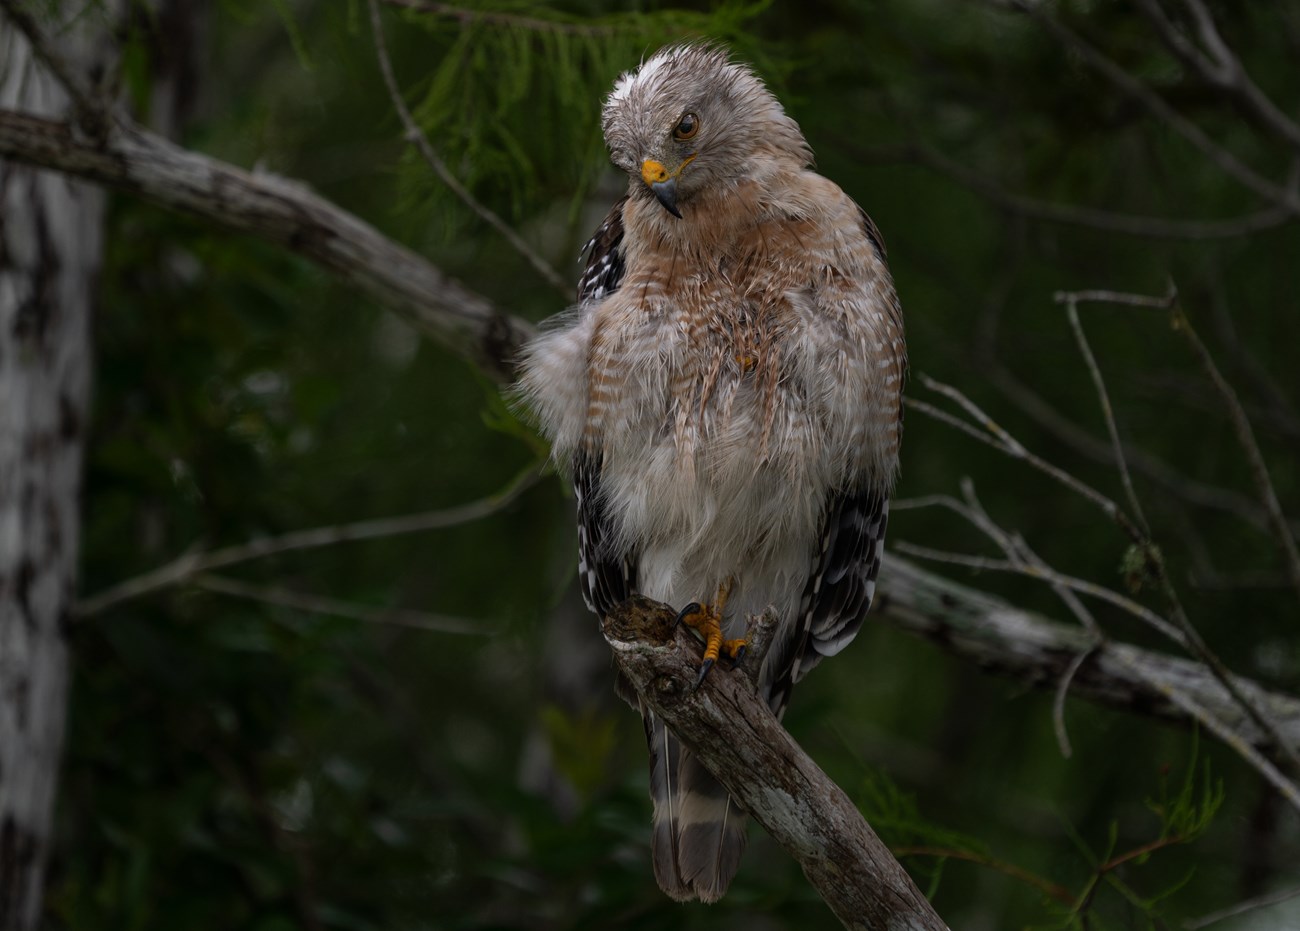 A red-shouldered hawk perches on a tree branch. Its feathers are ruffled and damp.